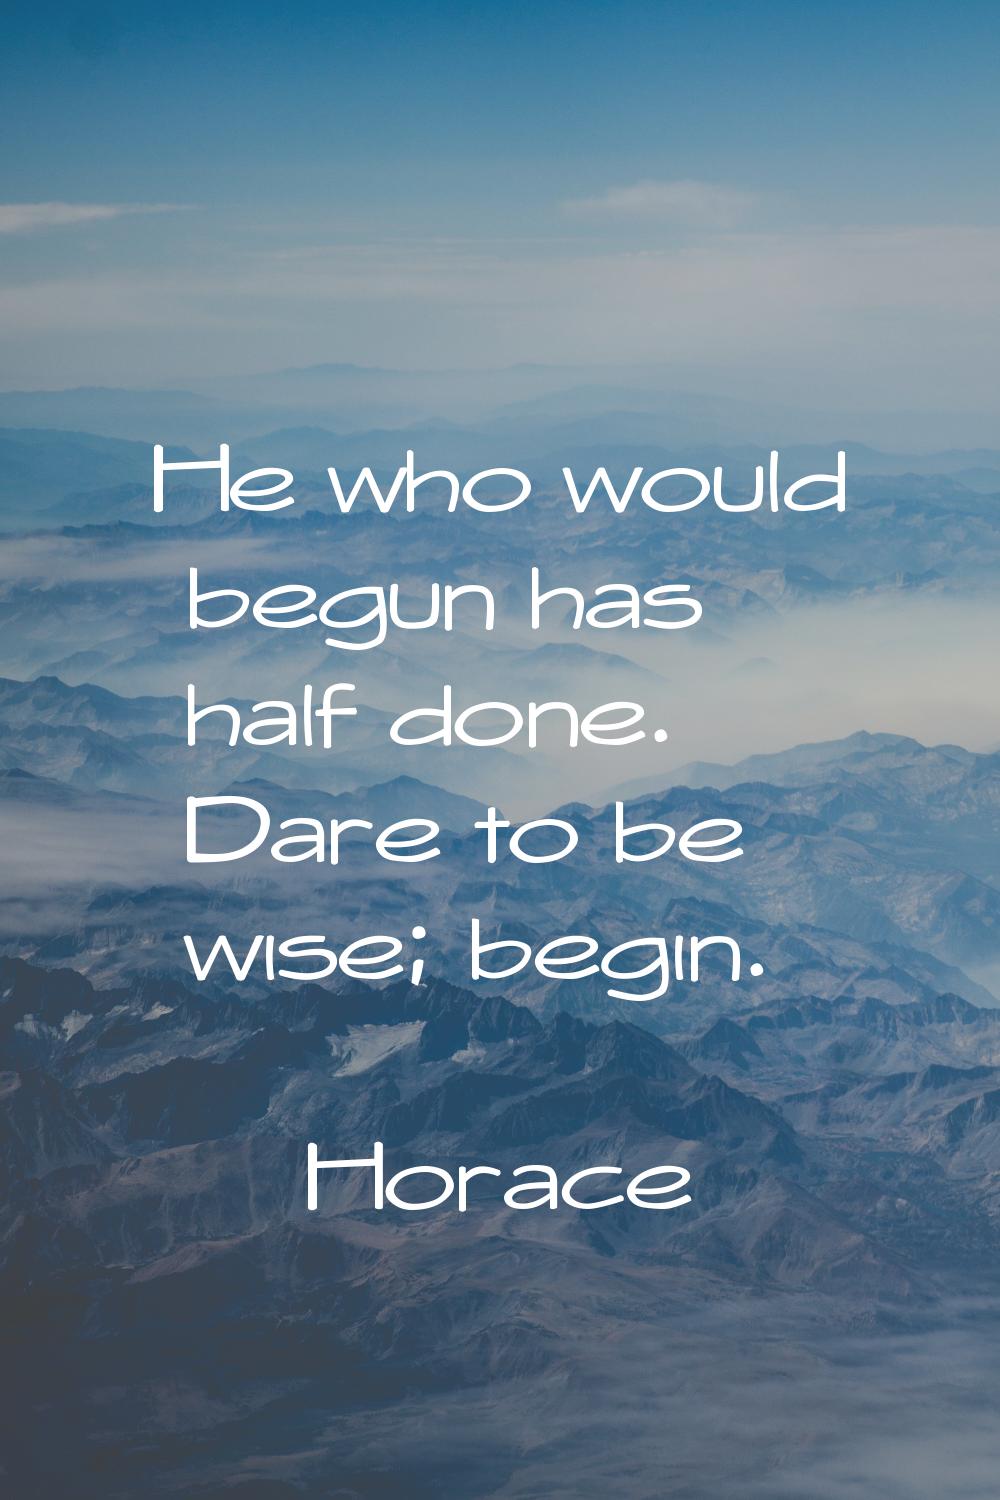 He who would begun has half done. Dare to be wise; begin.